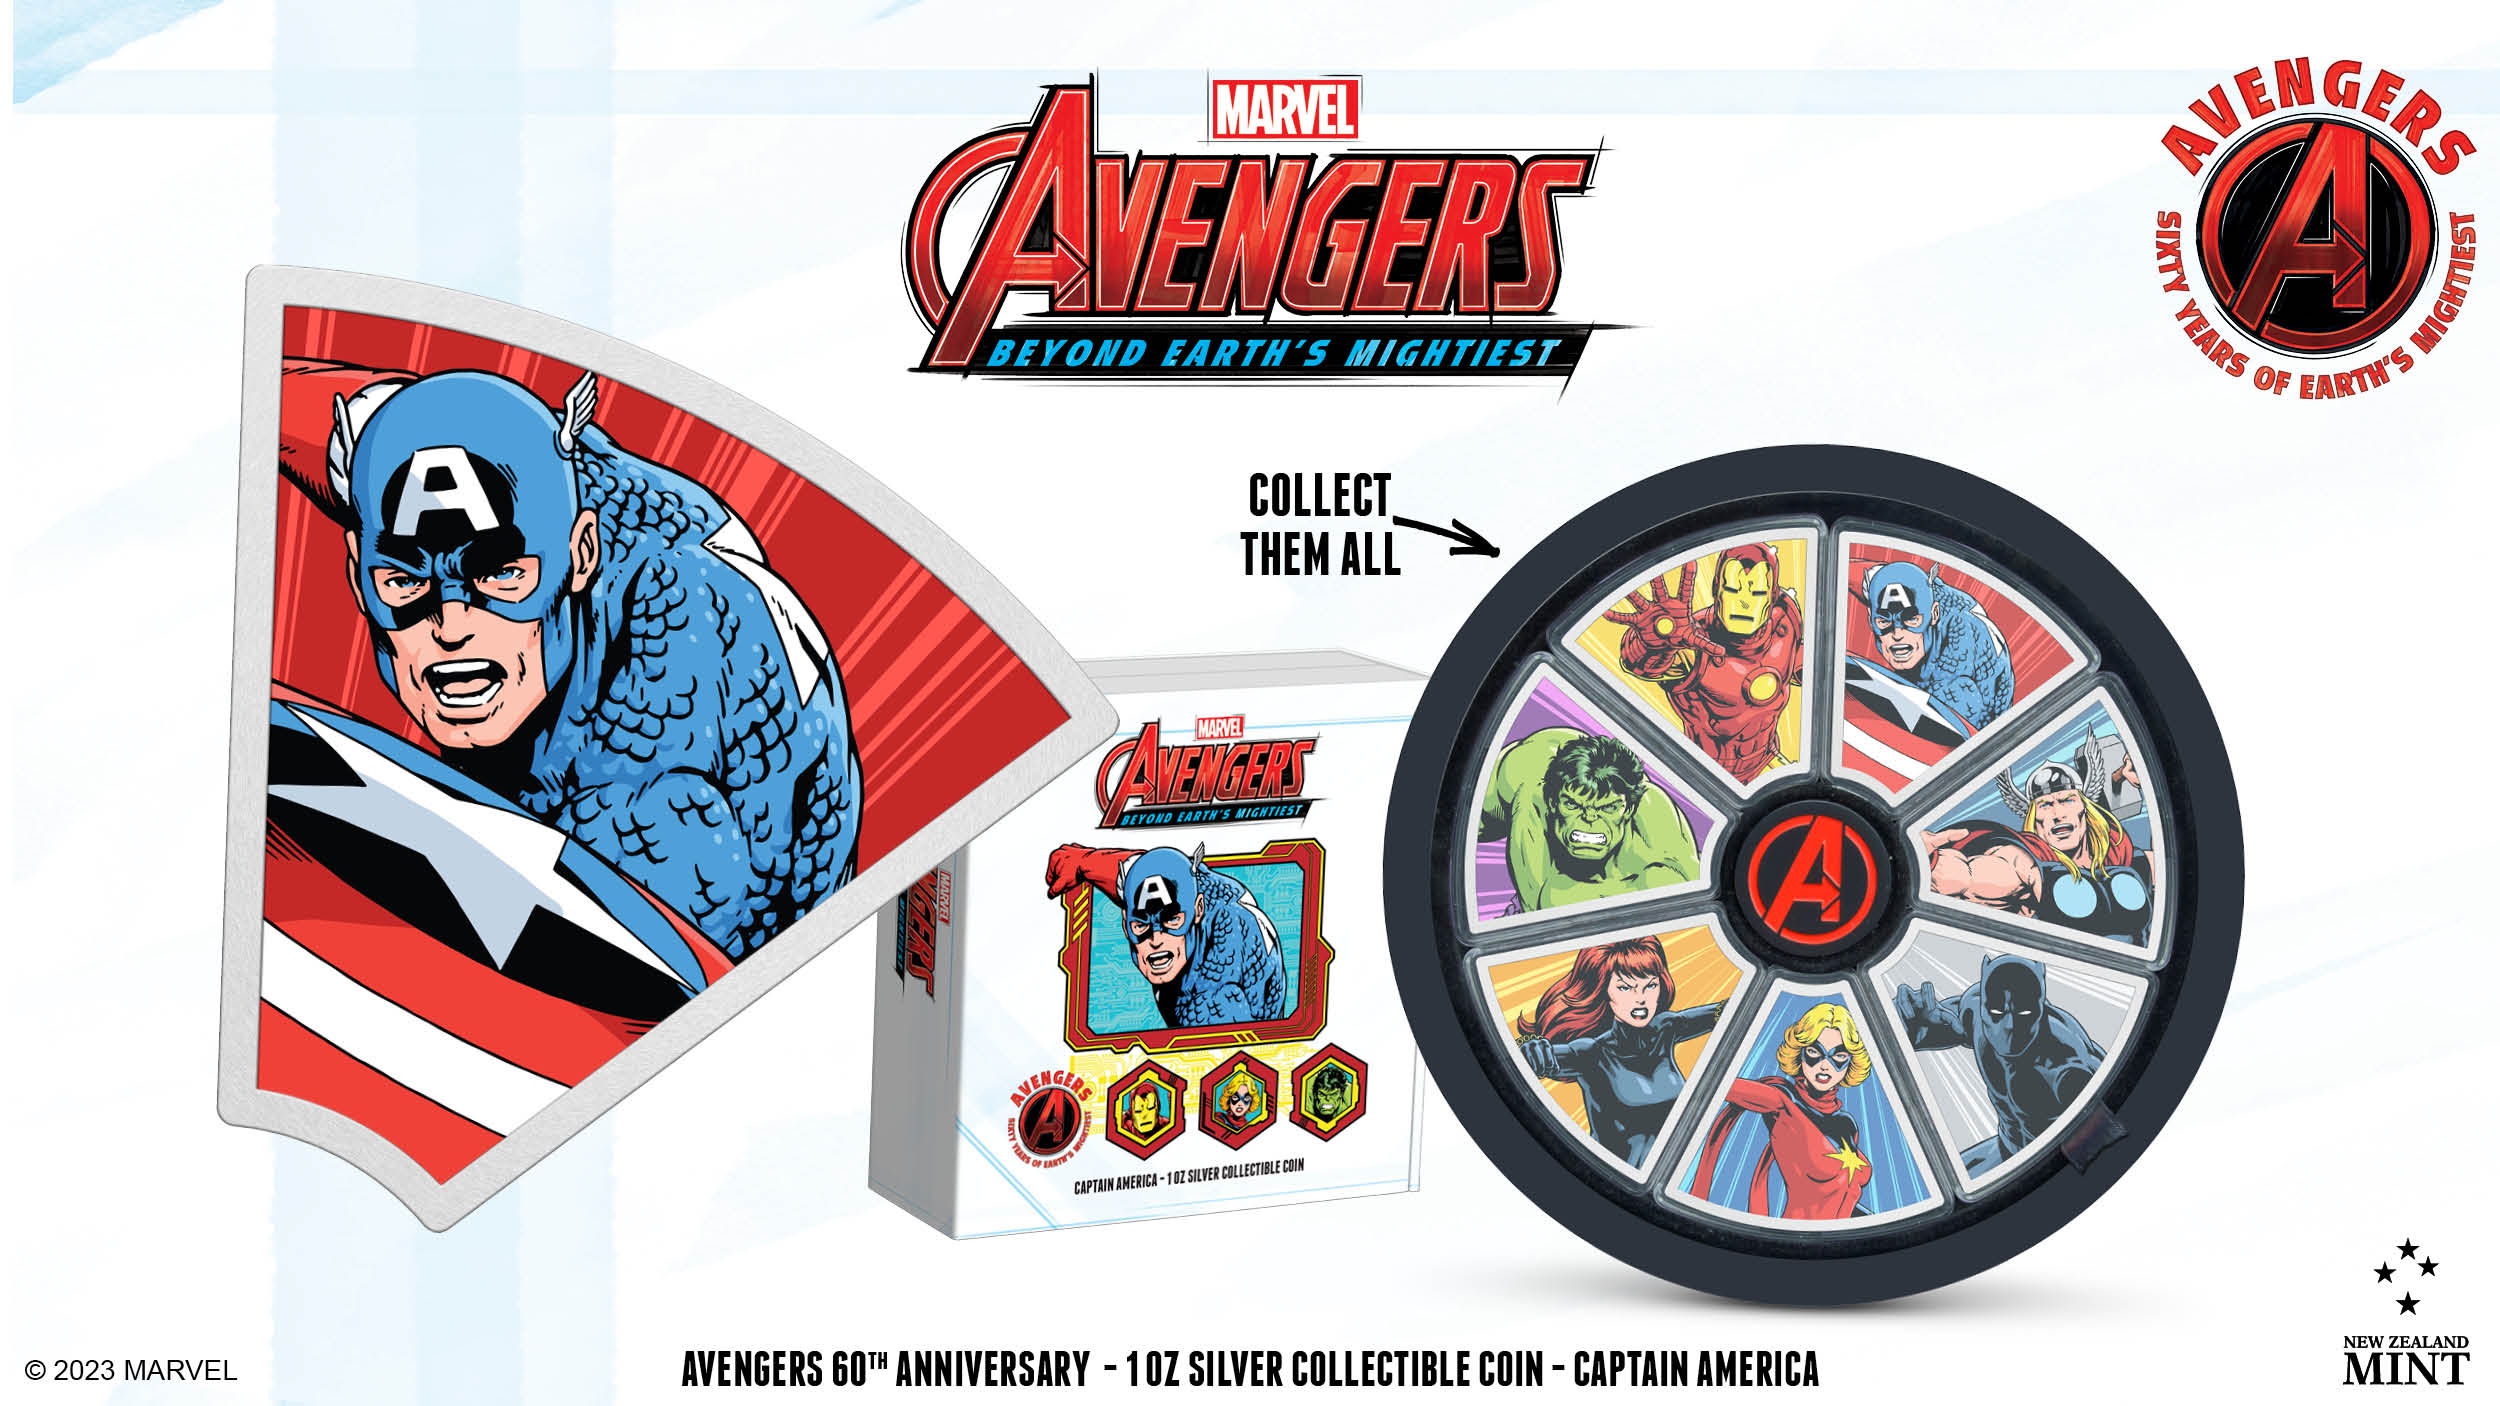 To celebrate The Avengers 60th anniversary, we introduce a special new 1oz pure silver coin series. Of course, we had to kick it off with Captain America! It is designed with epic colour to show the iconic shield-wielding hero in a powerful pose.